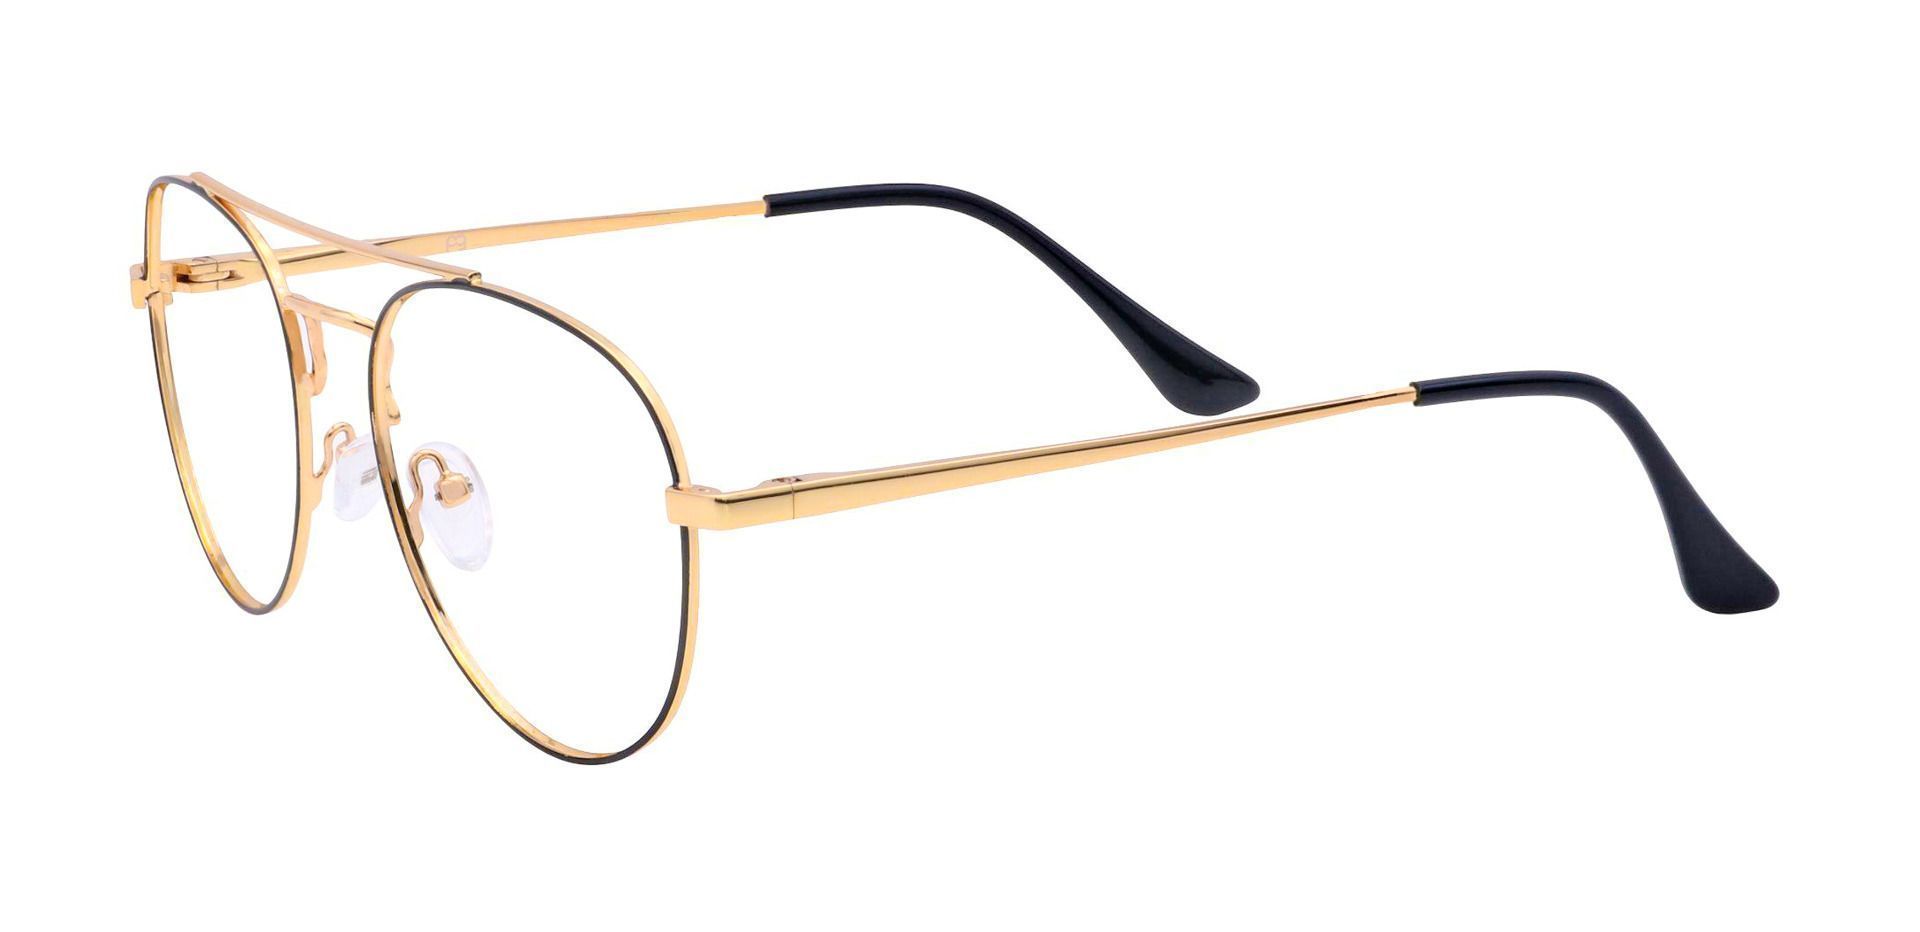 Trapp Aviator Lined Bifocal Glasses - Gold